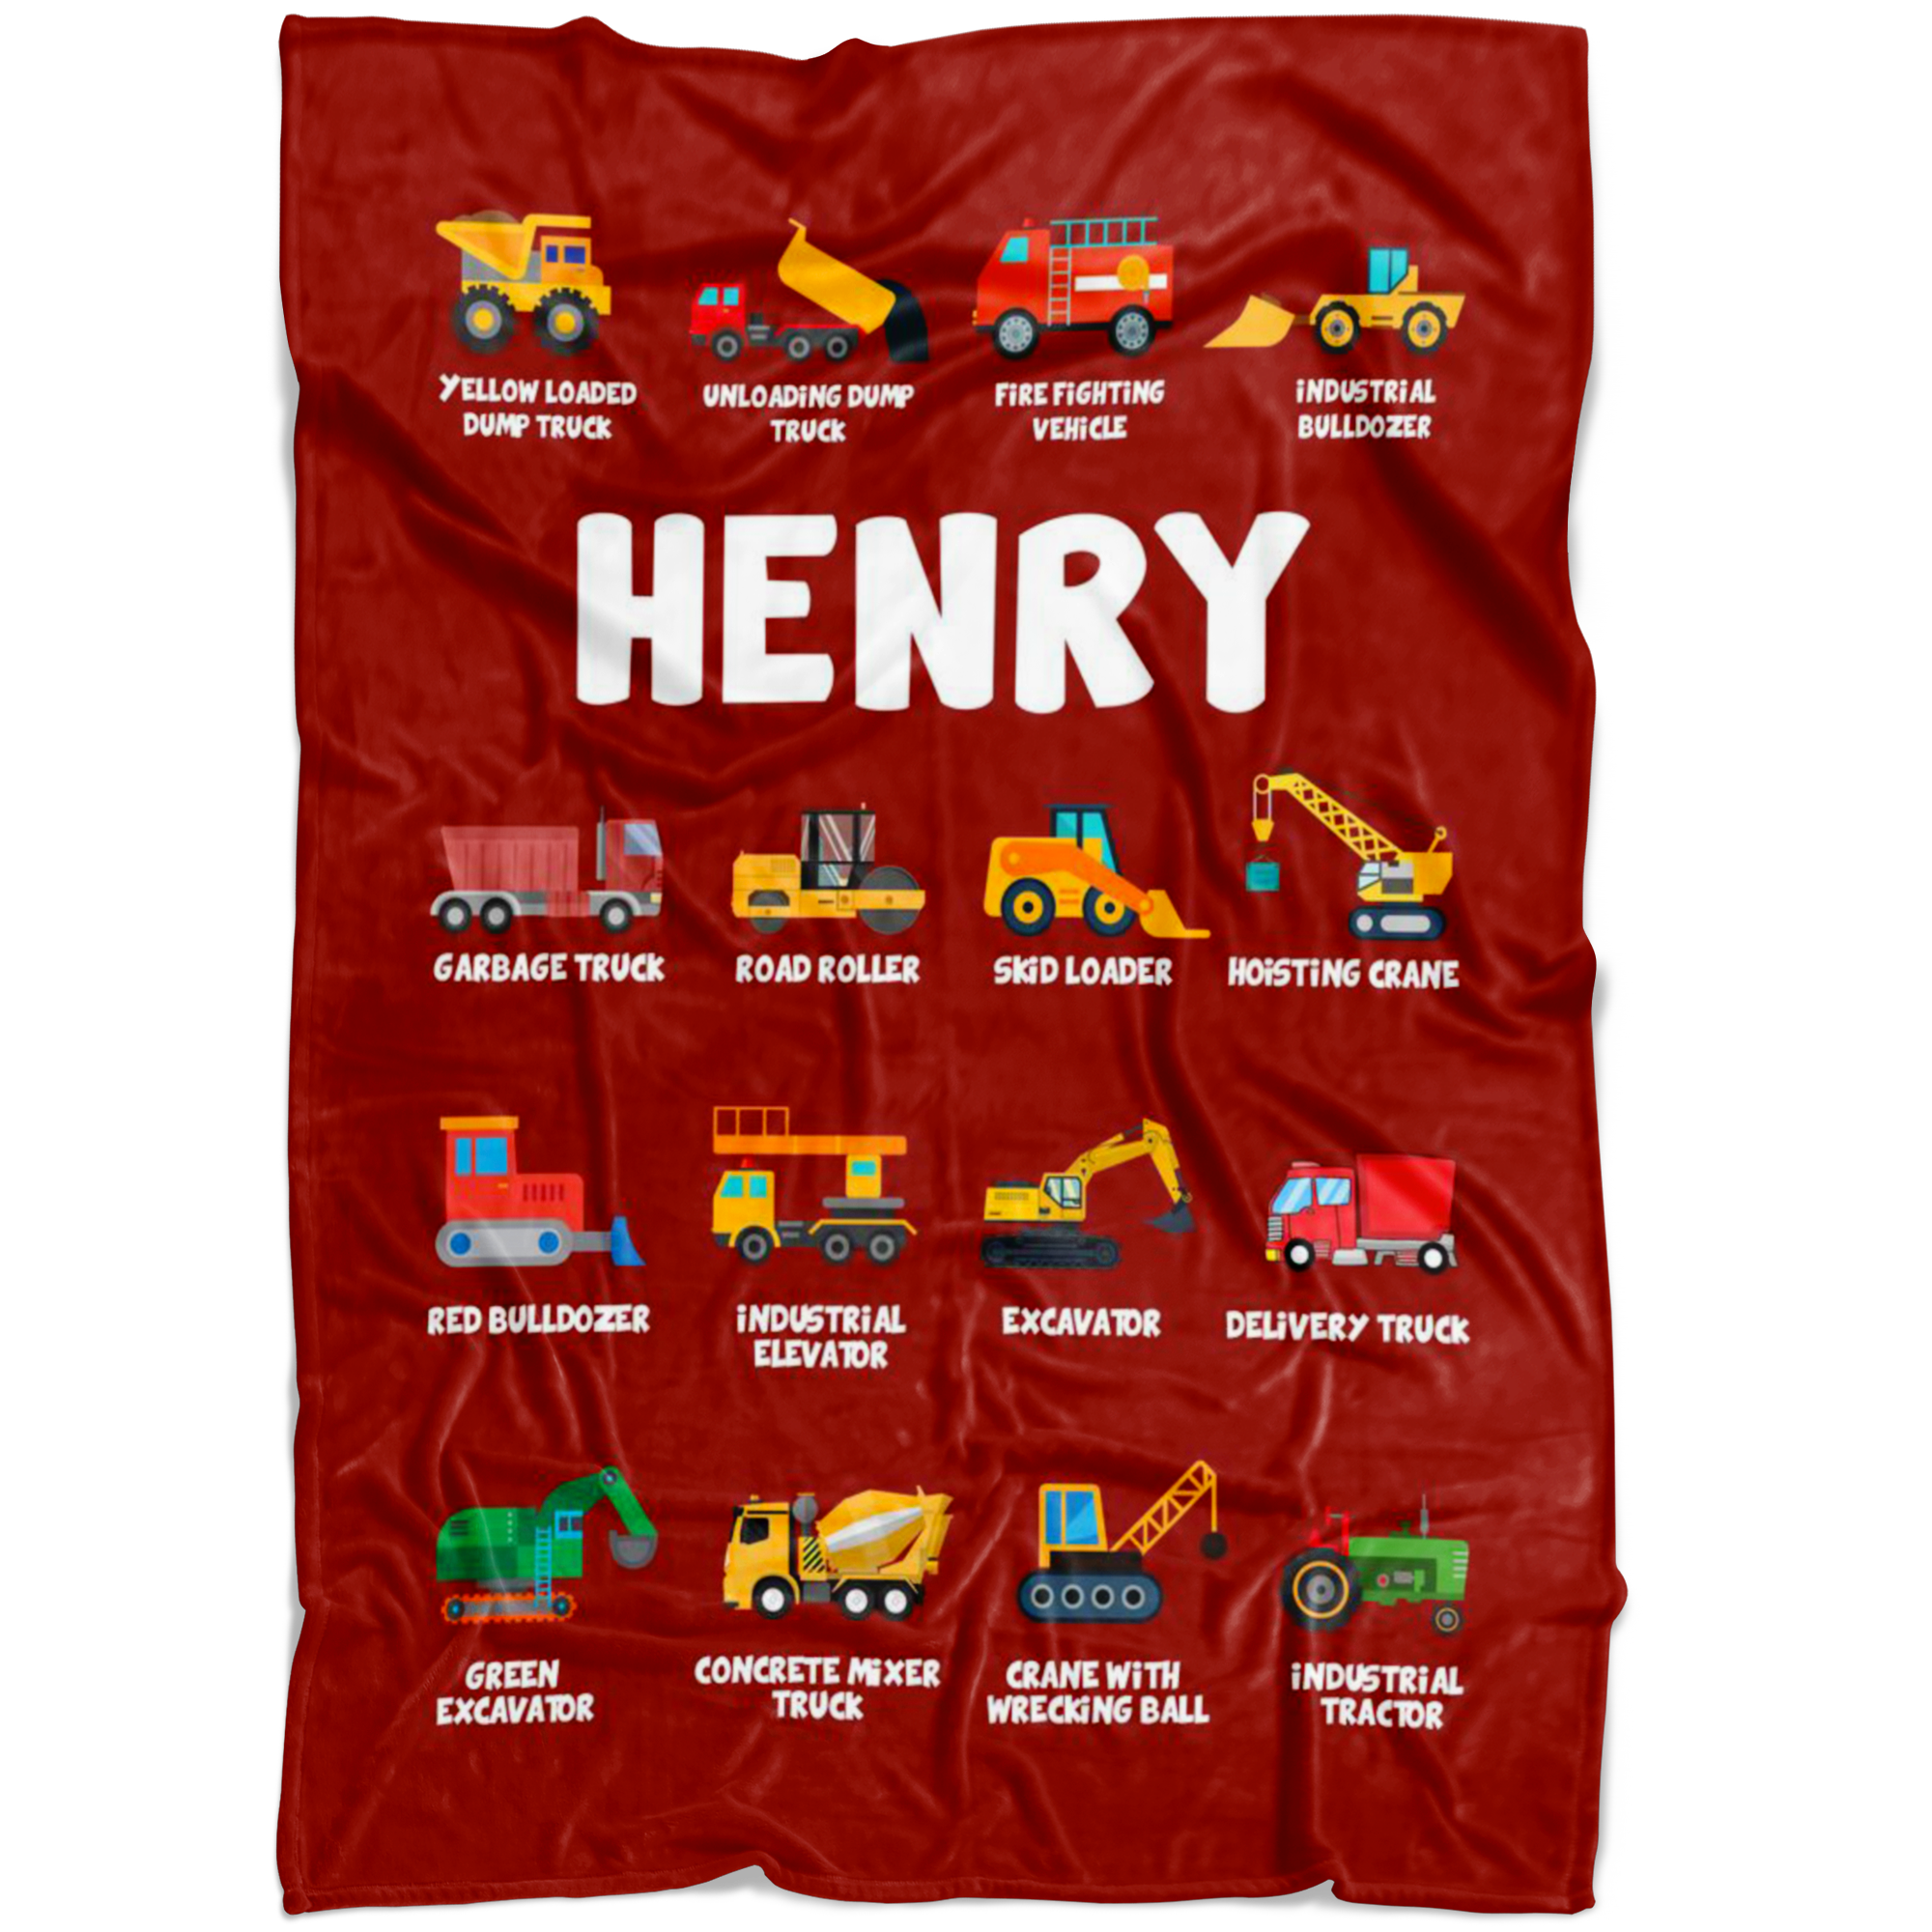 Henry Construction Blanket Red